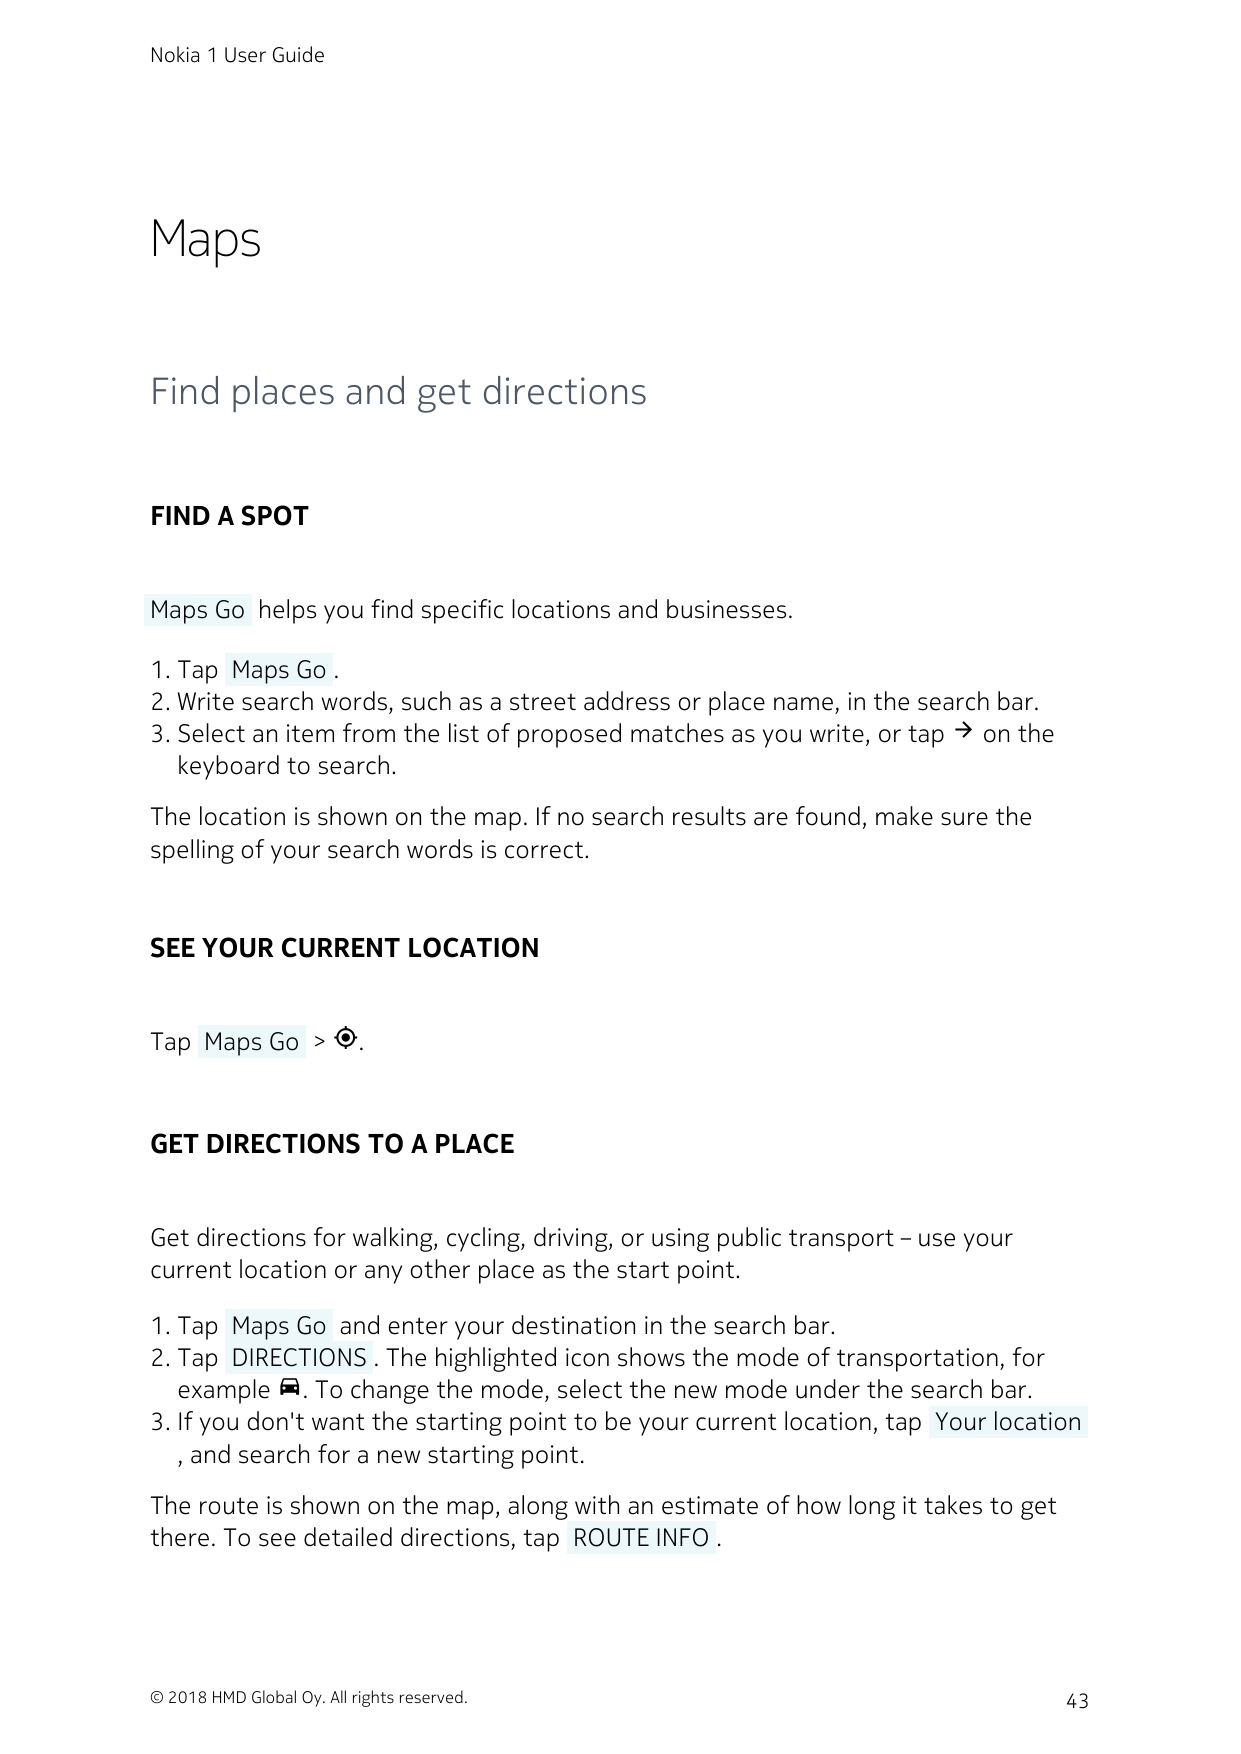 Nokia 1 User GuideMapsFind places and get directionsFIND A SPOT Maps Go  helps you find specific locations and businesses.1. Tap